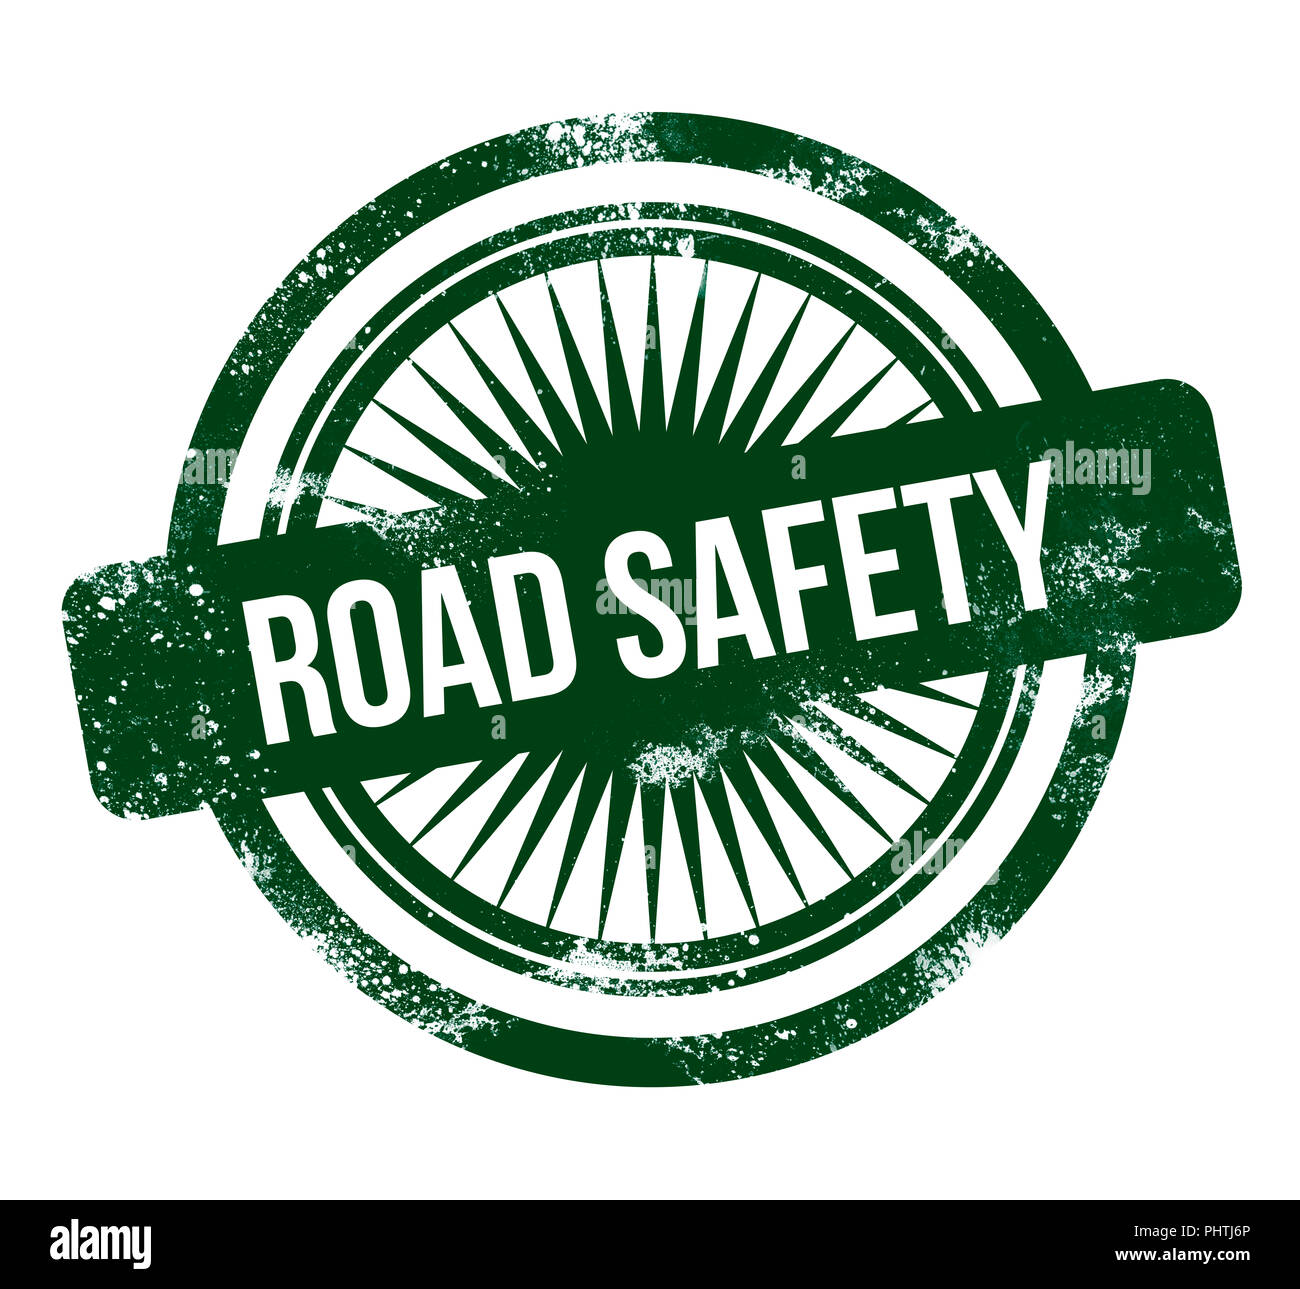 road safety - green grunge stamp Stock Photo